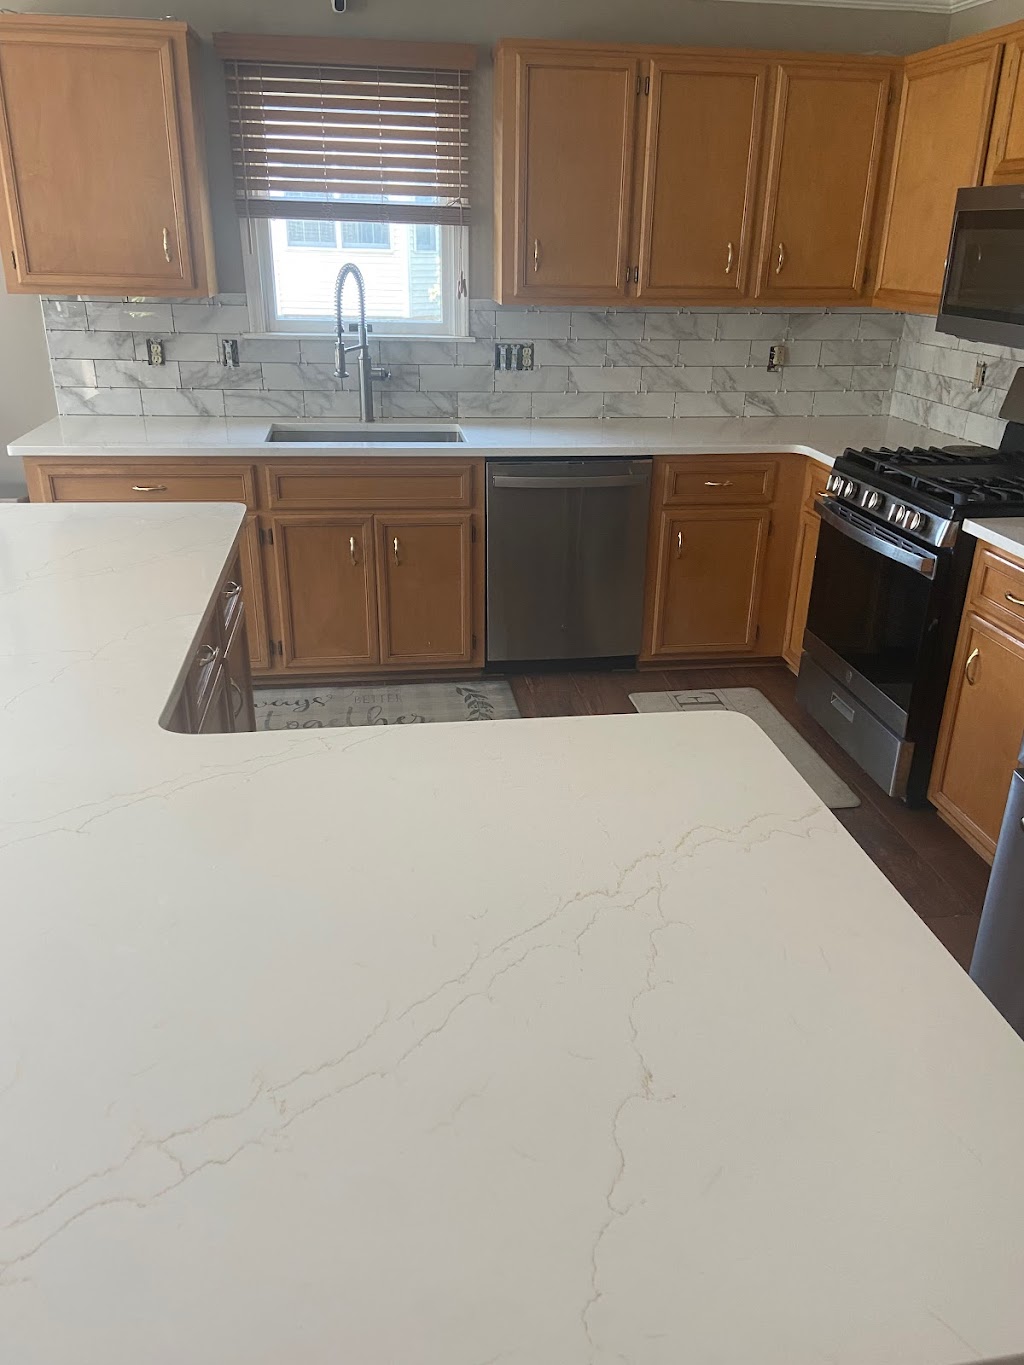 Oak and Stone Remodeling & Cabinets | 460 Allentown Dr, Allentown, PA 18109 | Phone: (484) 707-8638